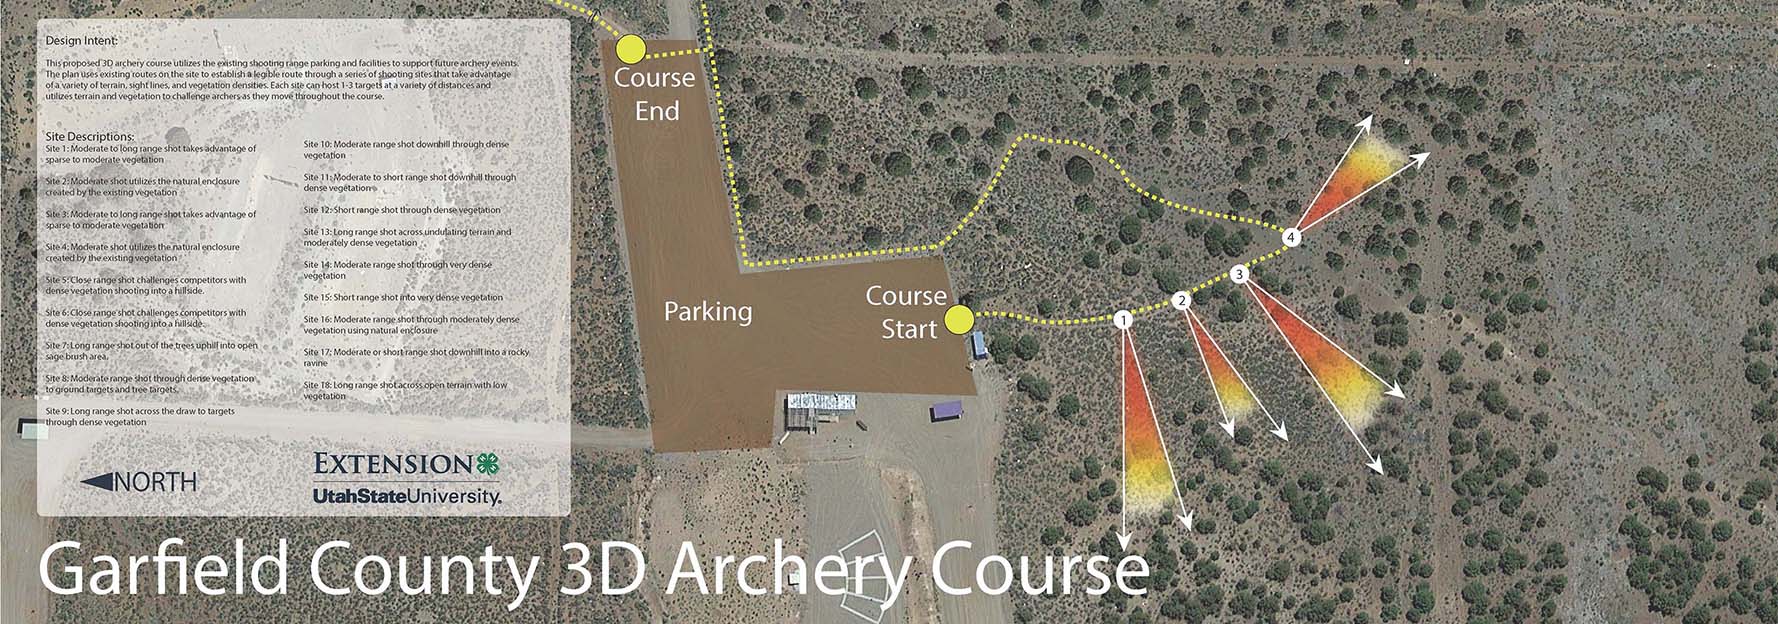 Garfield County Archery Course Rendering